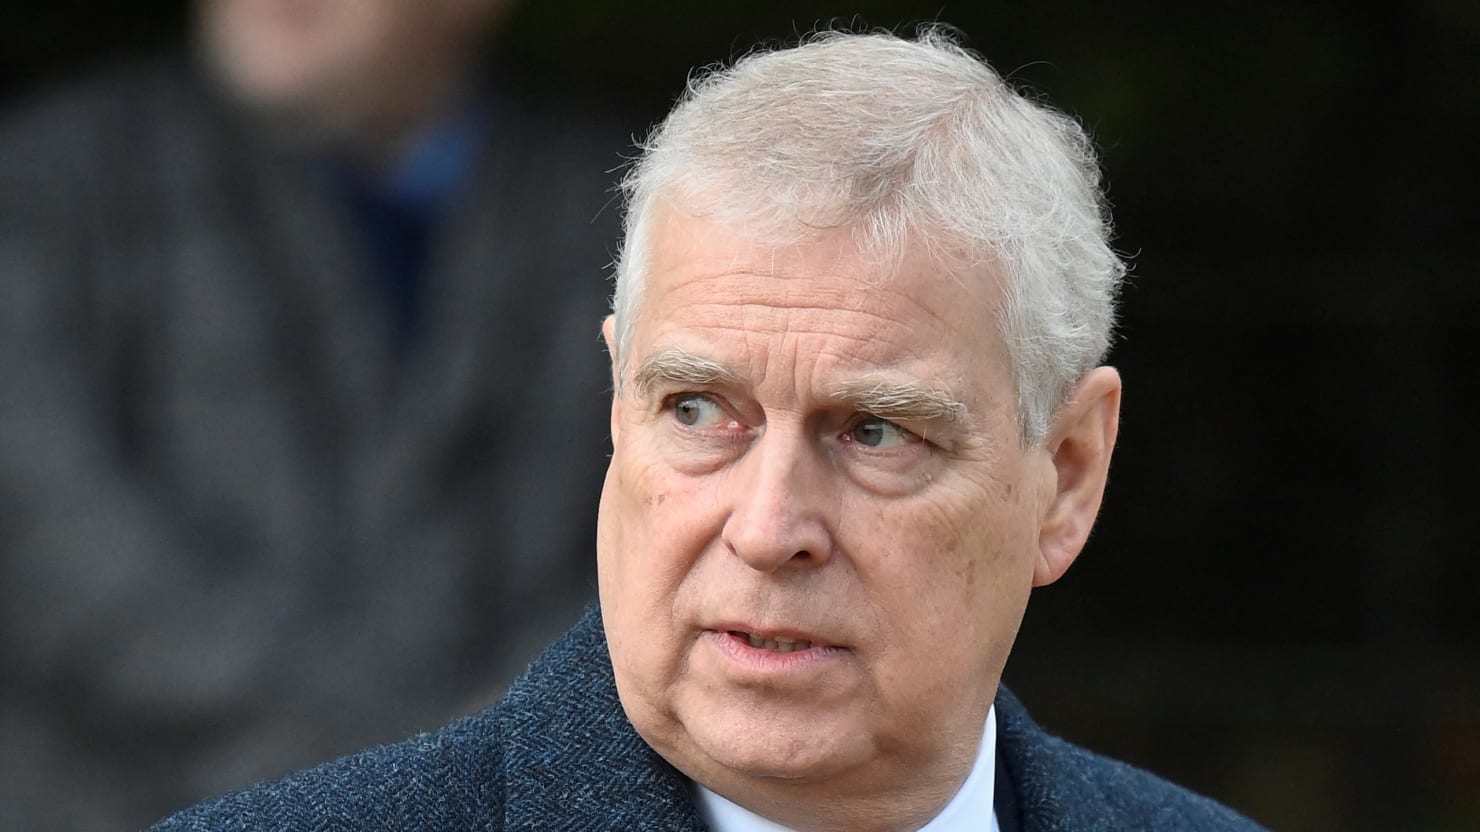 ‘No Investigation’ Launched Into Prince Andrew